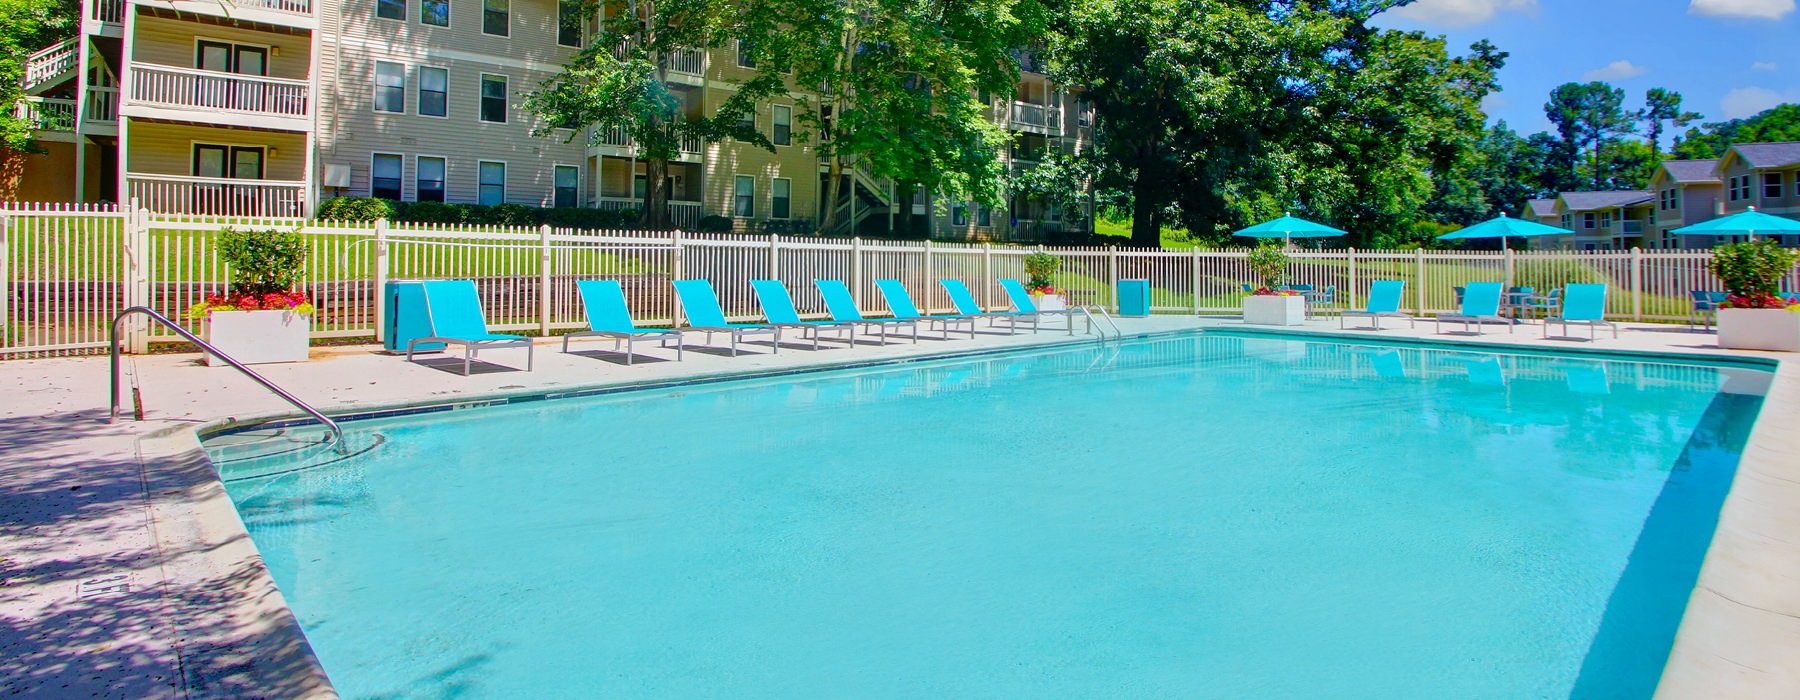 large pool surrounded by adjustable lounge chairs